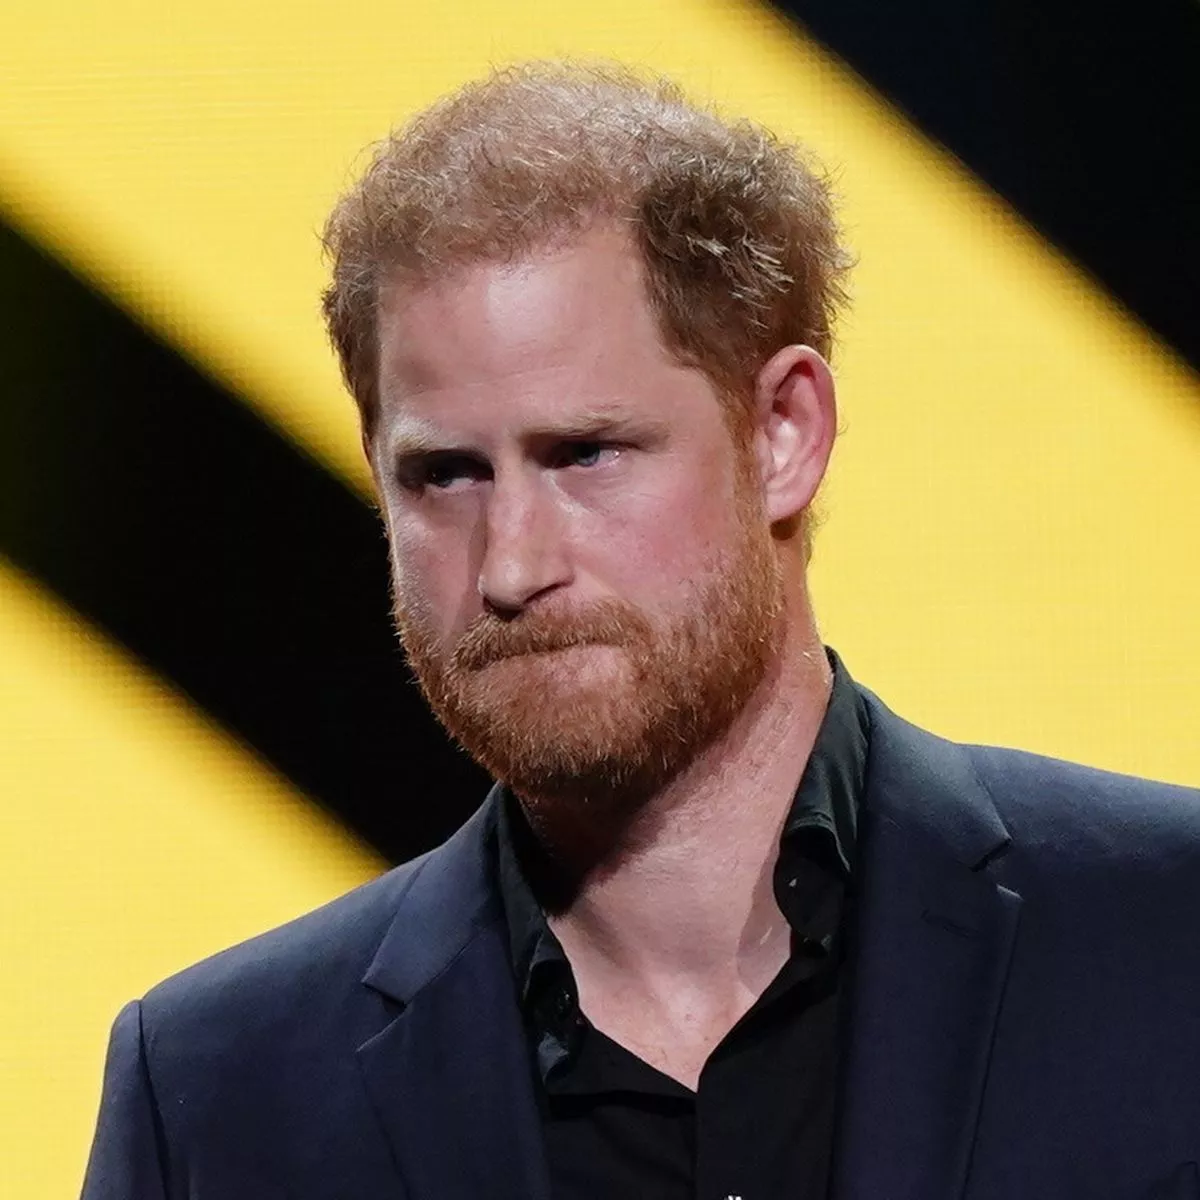 Prince Harry ‘in tears’ as King Charles makes brutal new announcement